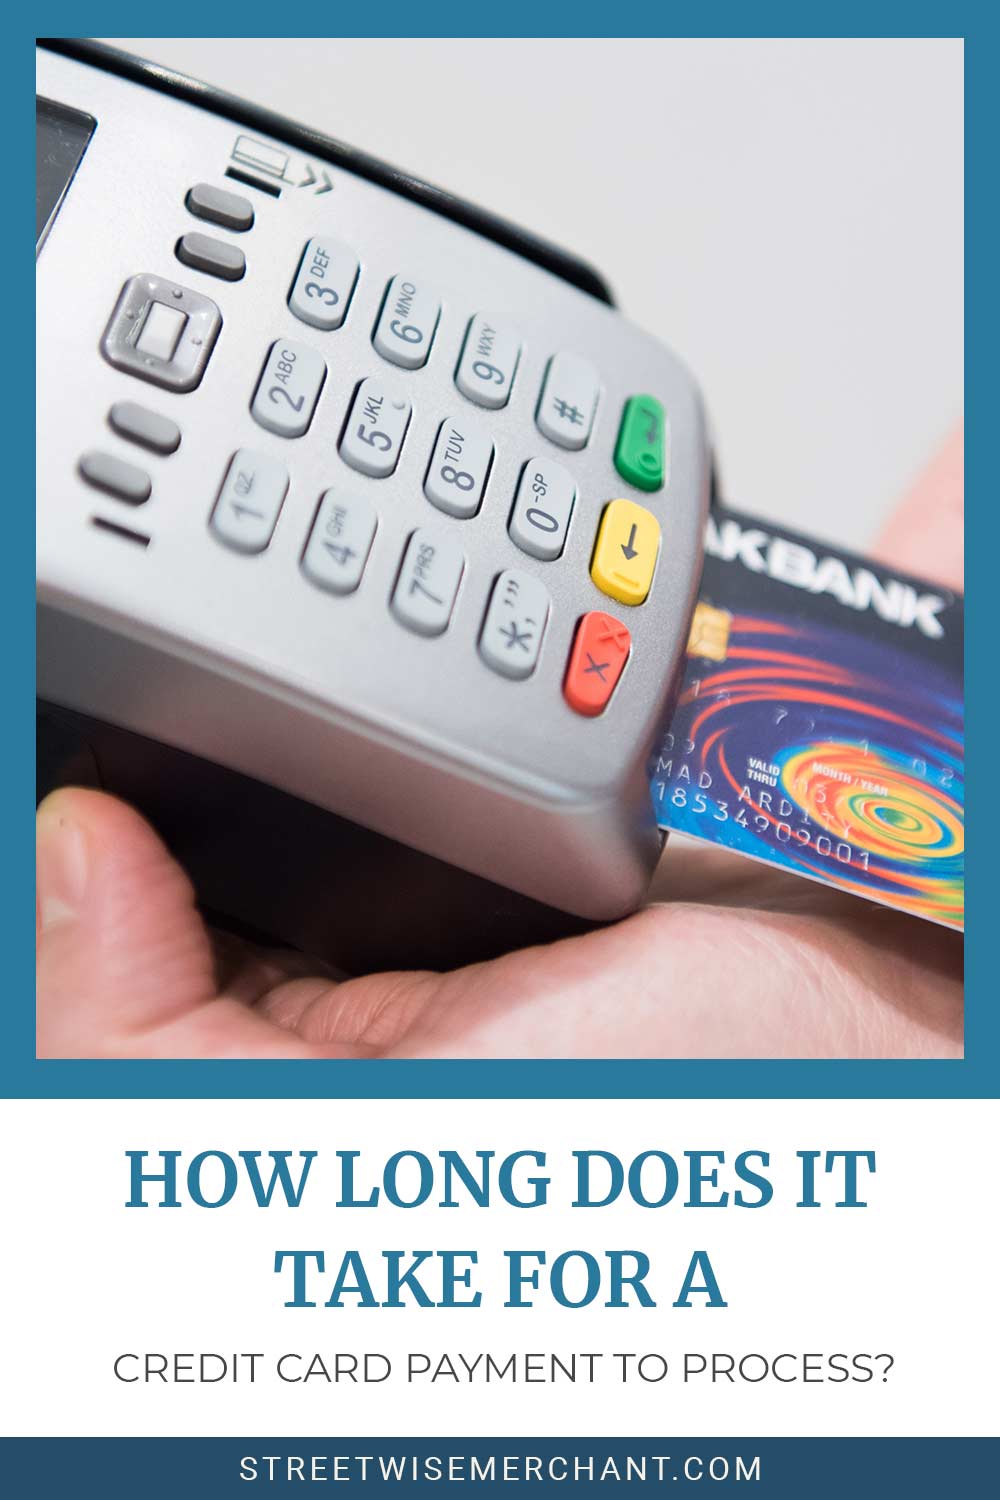 How Long Does It Take for a Credit Card Payment to Process?